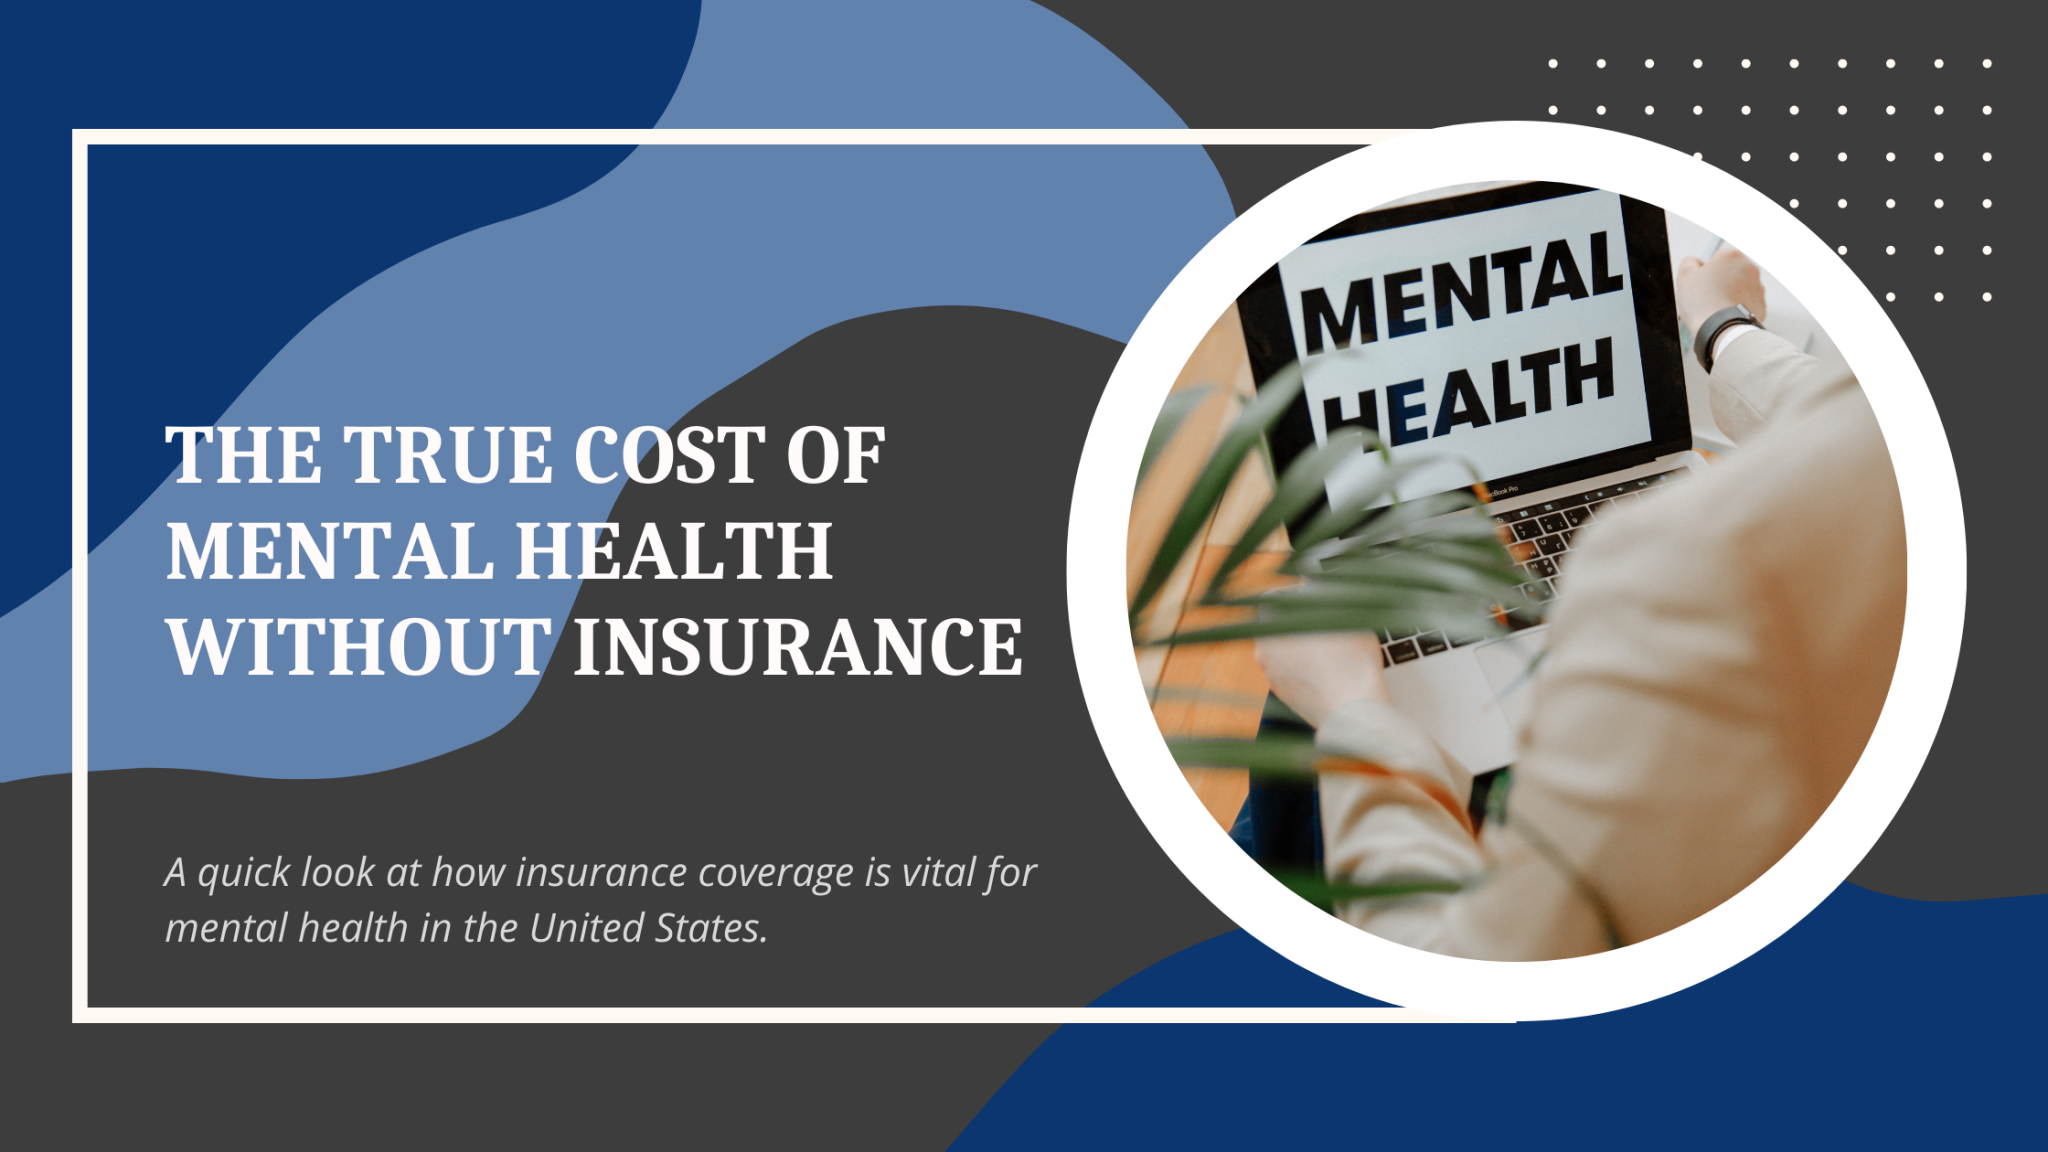 The Cost of Mental Health Without Insurance